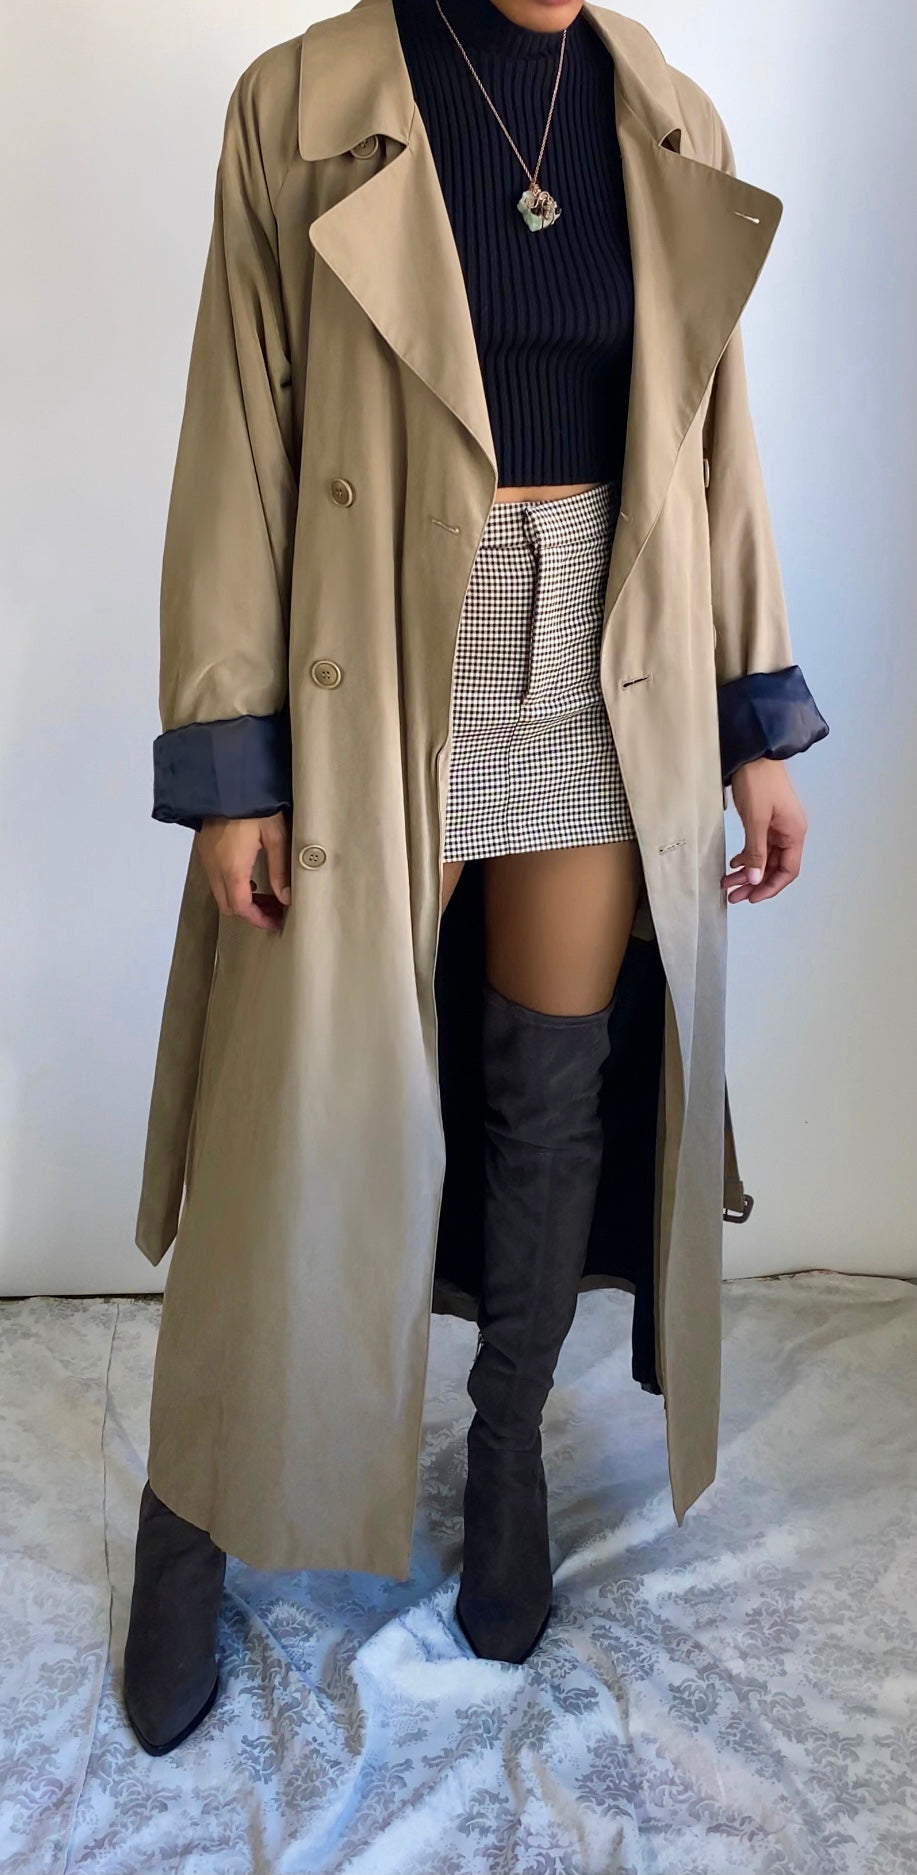 Vintage Double Breasted Belted Trench Coat Light Beige | London Fog Trench Coat | Boyfriend Trench Coat (XL-XXL)